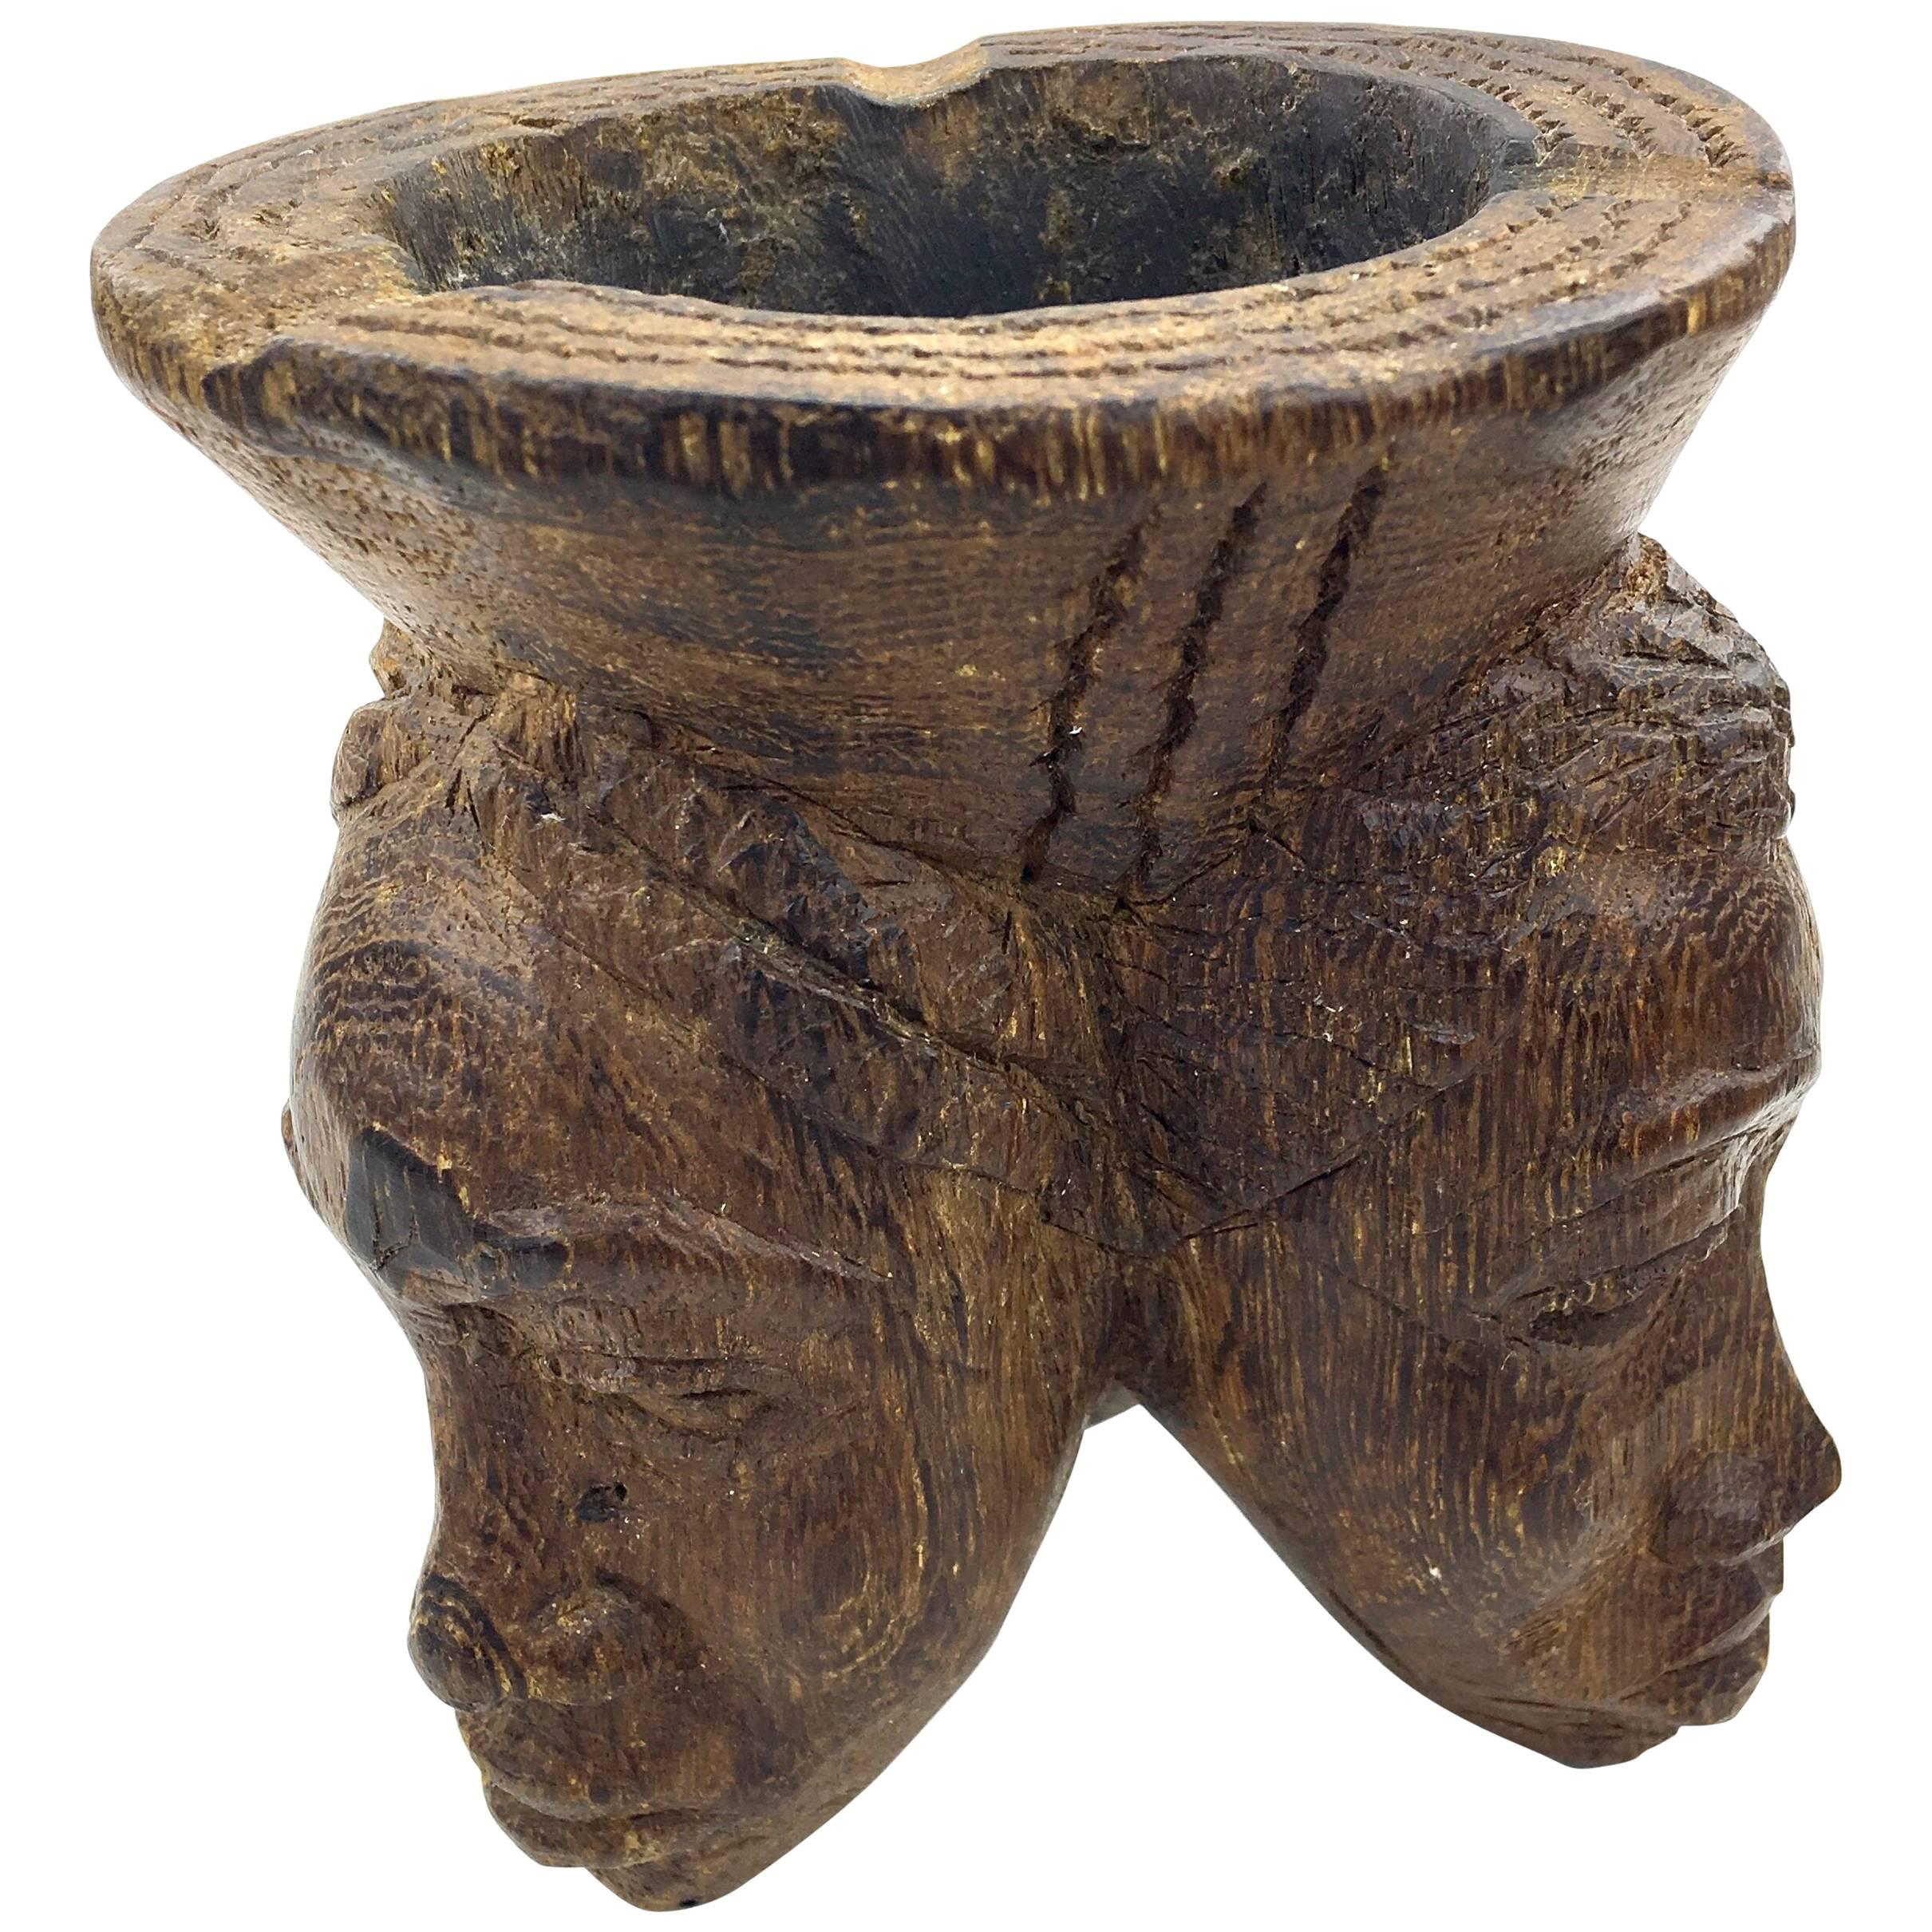 1960 Ashtray, Sculpture in Wood , Three Heads of Women